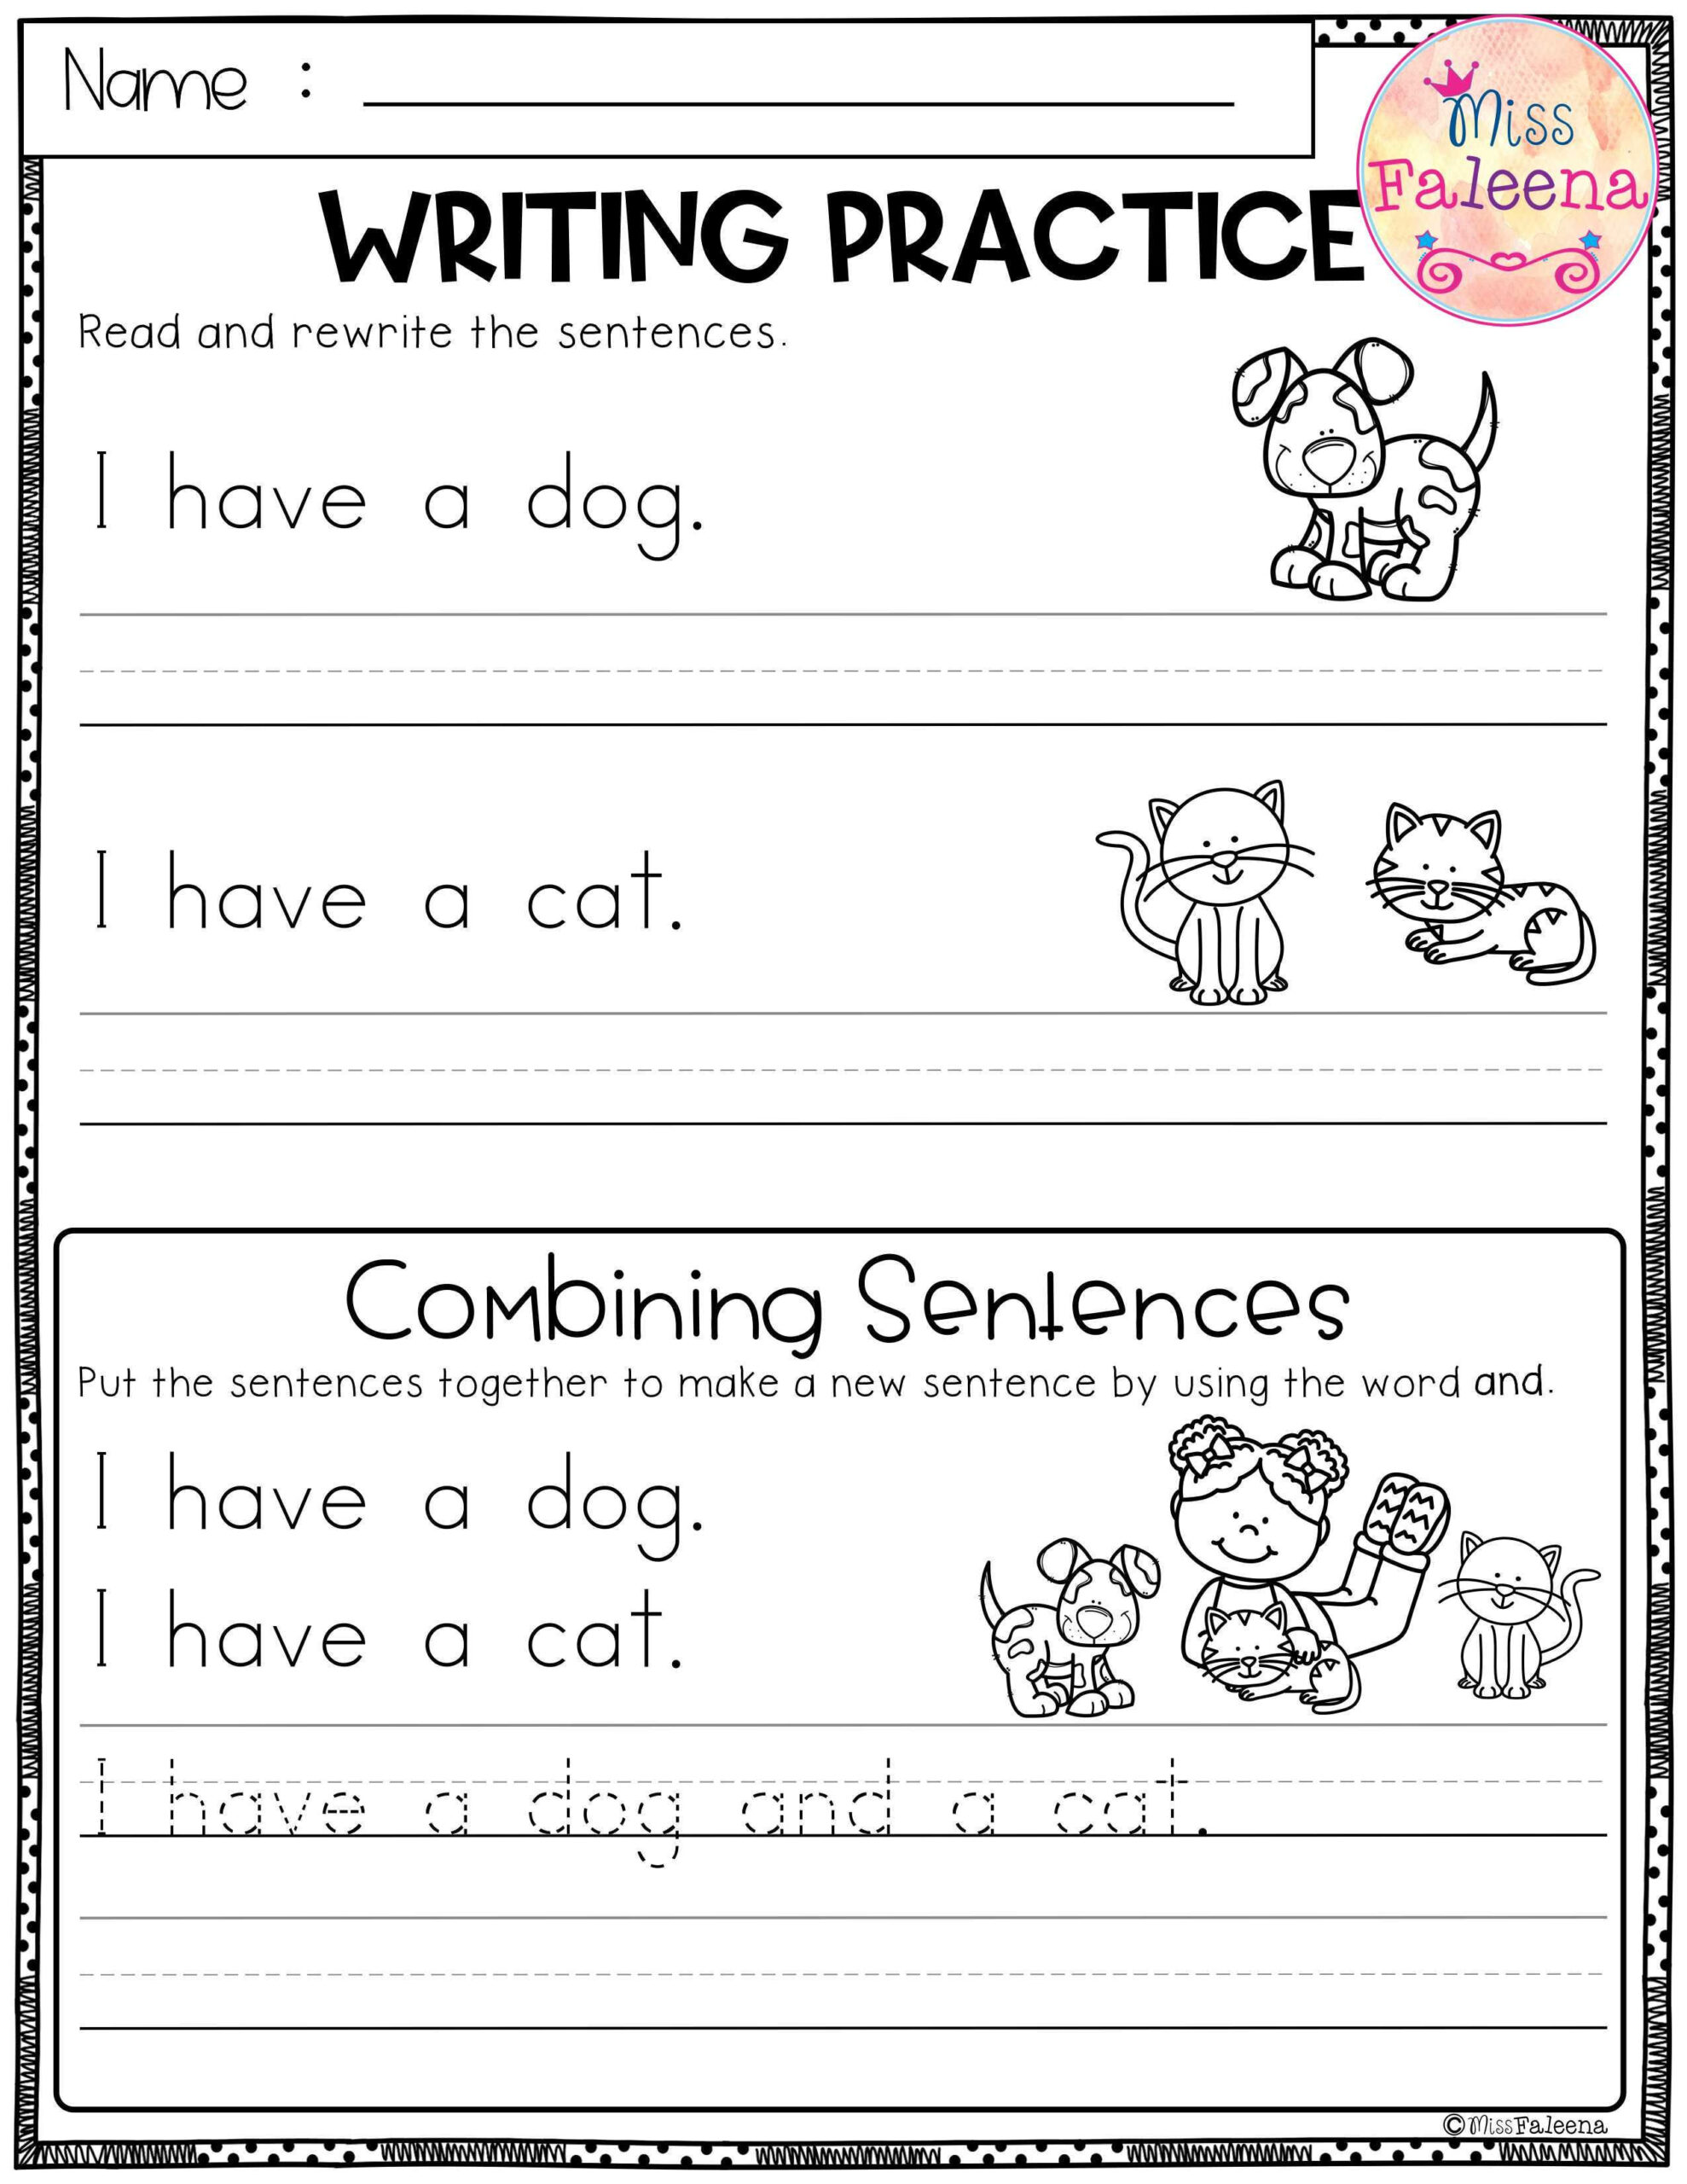 Free Writing Practice Combining Sentences This Product Has 3 Pages 